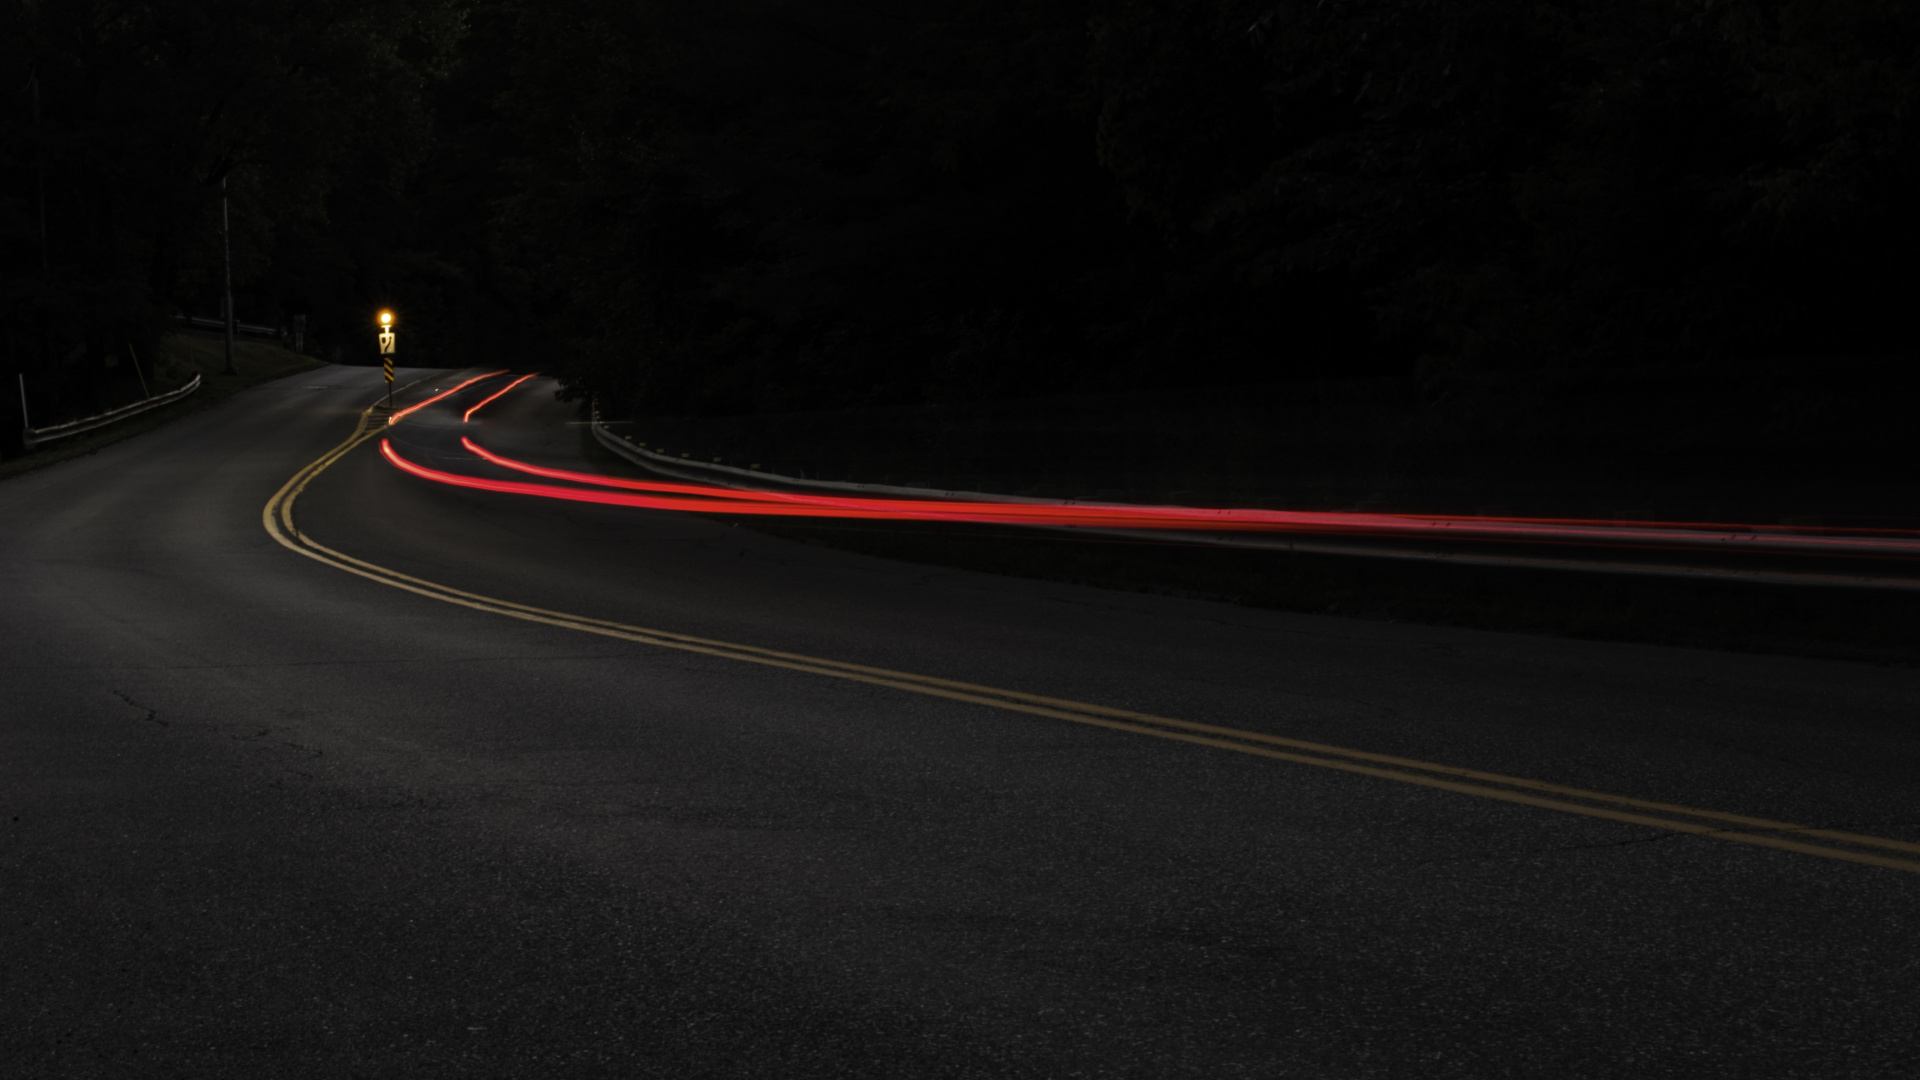 Time Lapse Photography of Road During Night Time. Wallpaper in 1920x1080 Resolution